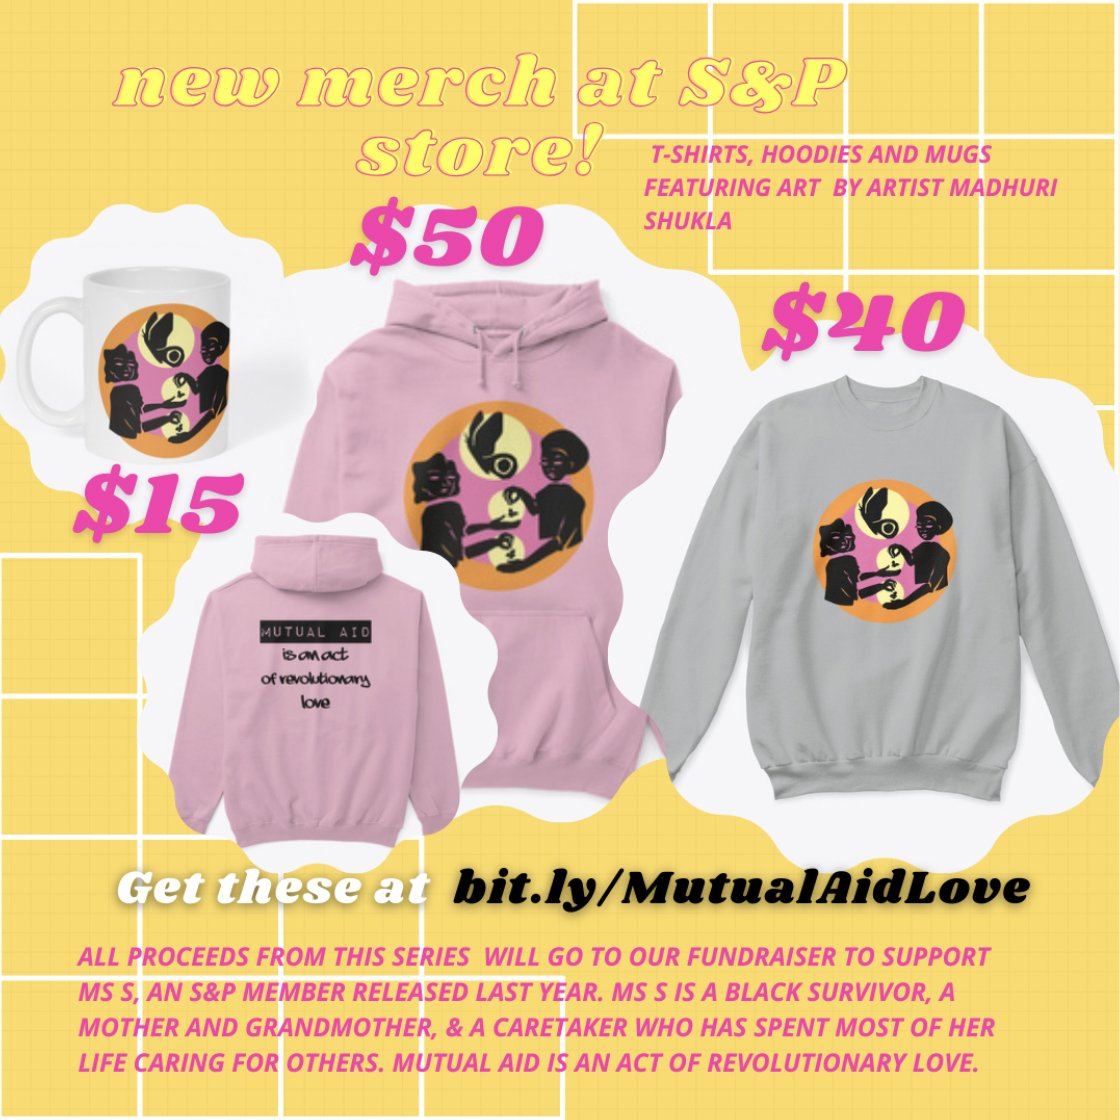 New merch on the @survivepunishNY online store featuring artist Madhuri Shukla's art to support S&P member, Ms S who was released last year. Ms S is a Black survivor, a mother and grandmother, who has spent most of her life caring for others. Check it out! bit.ly/MutualAidLove